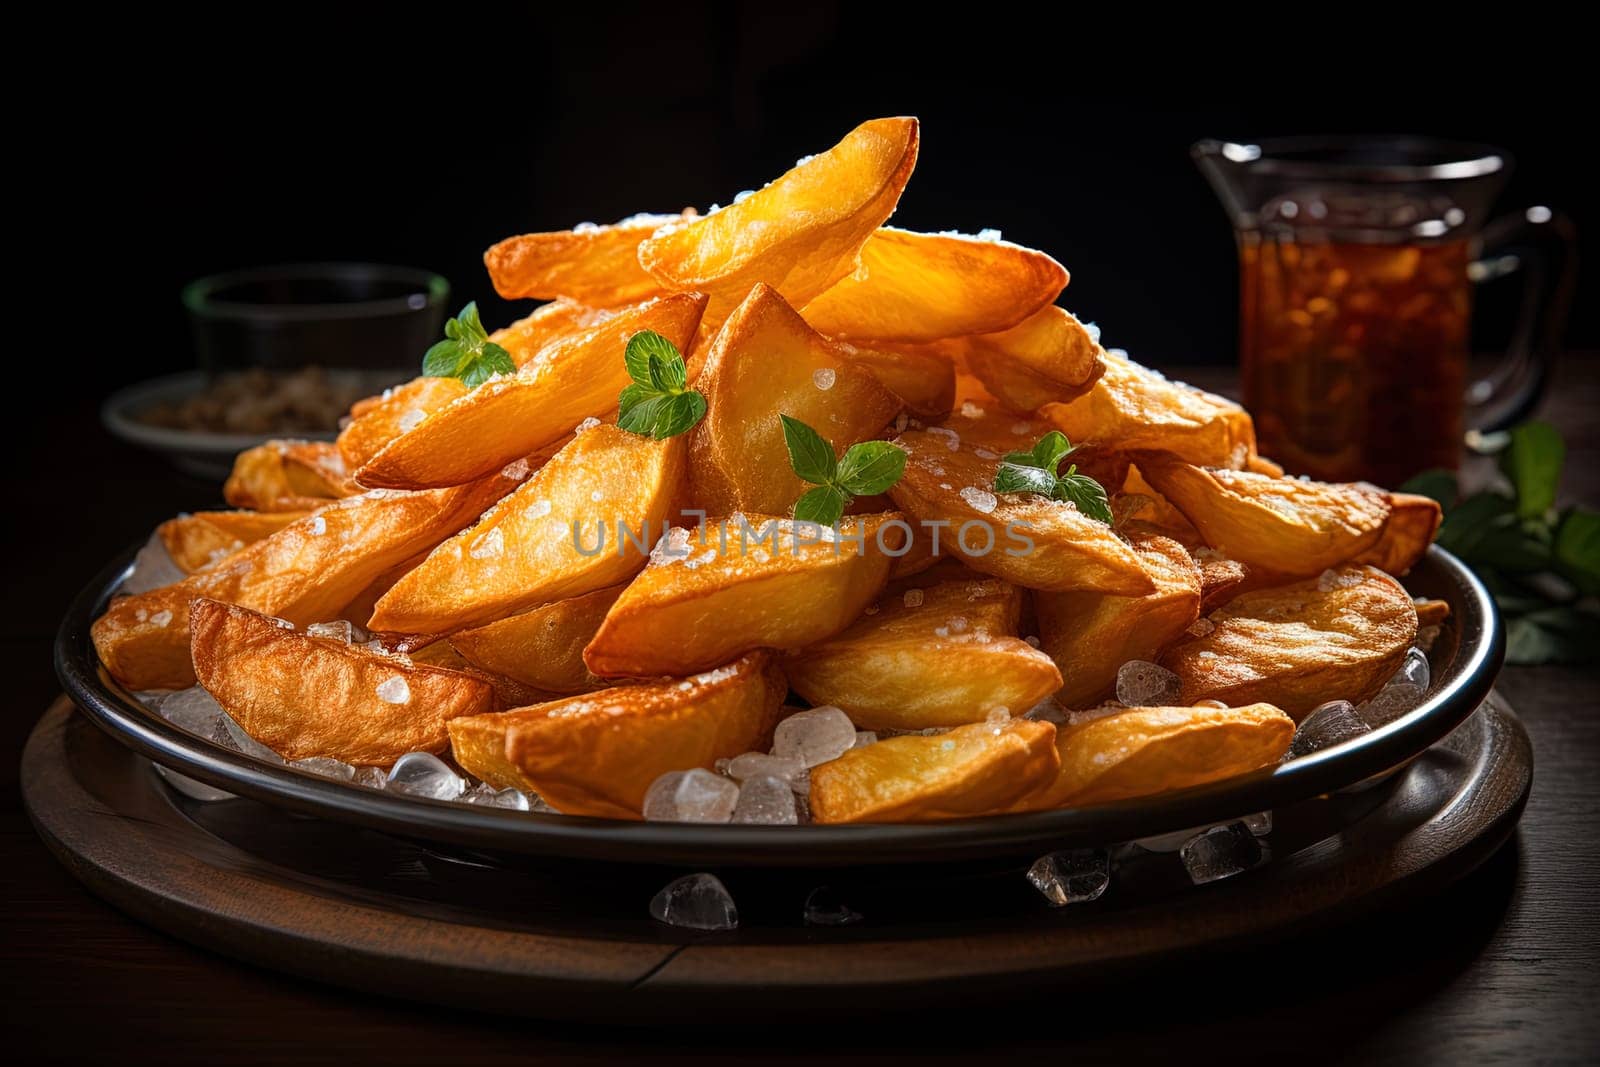 Fried potatoes served dish by Dustick